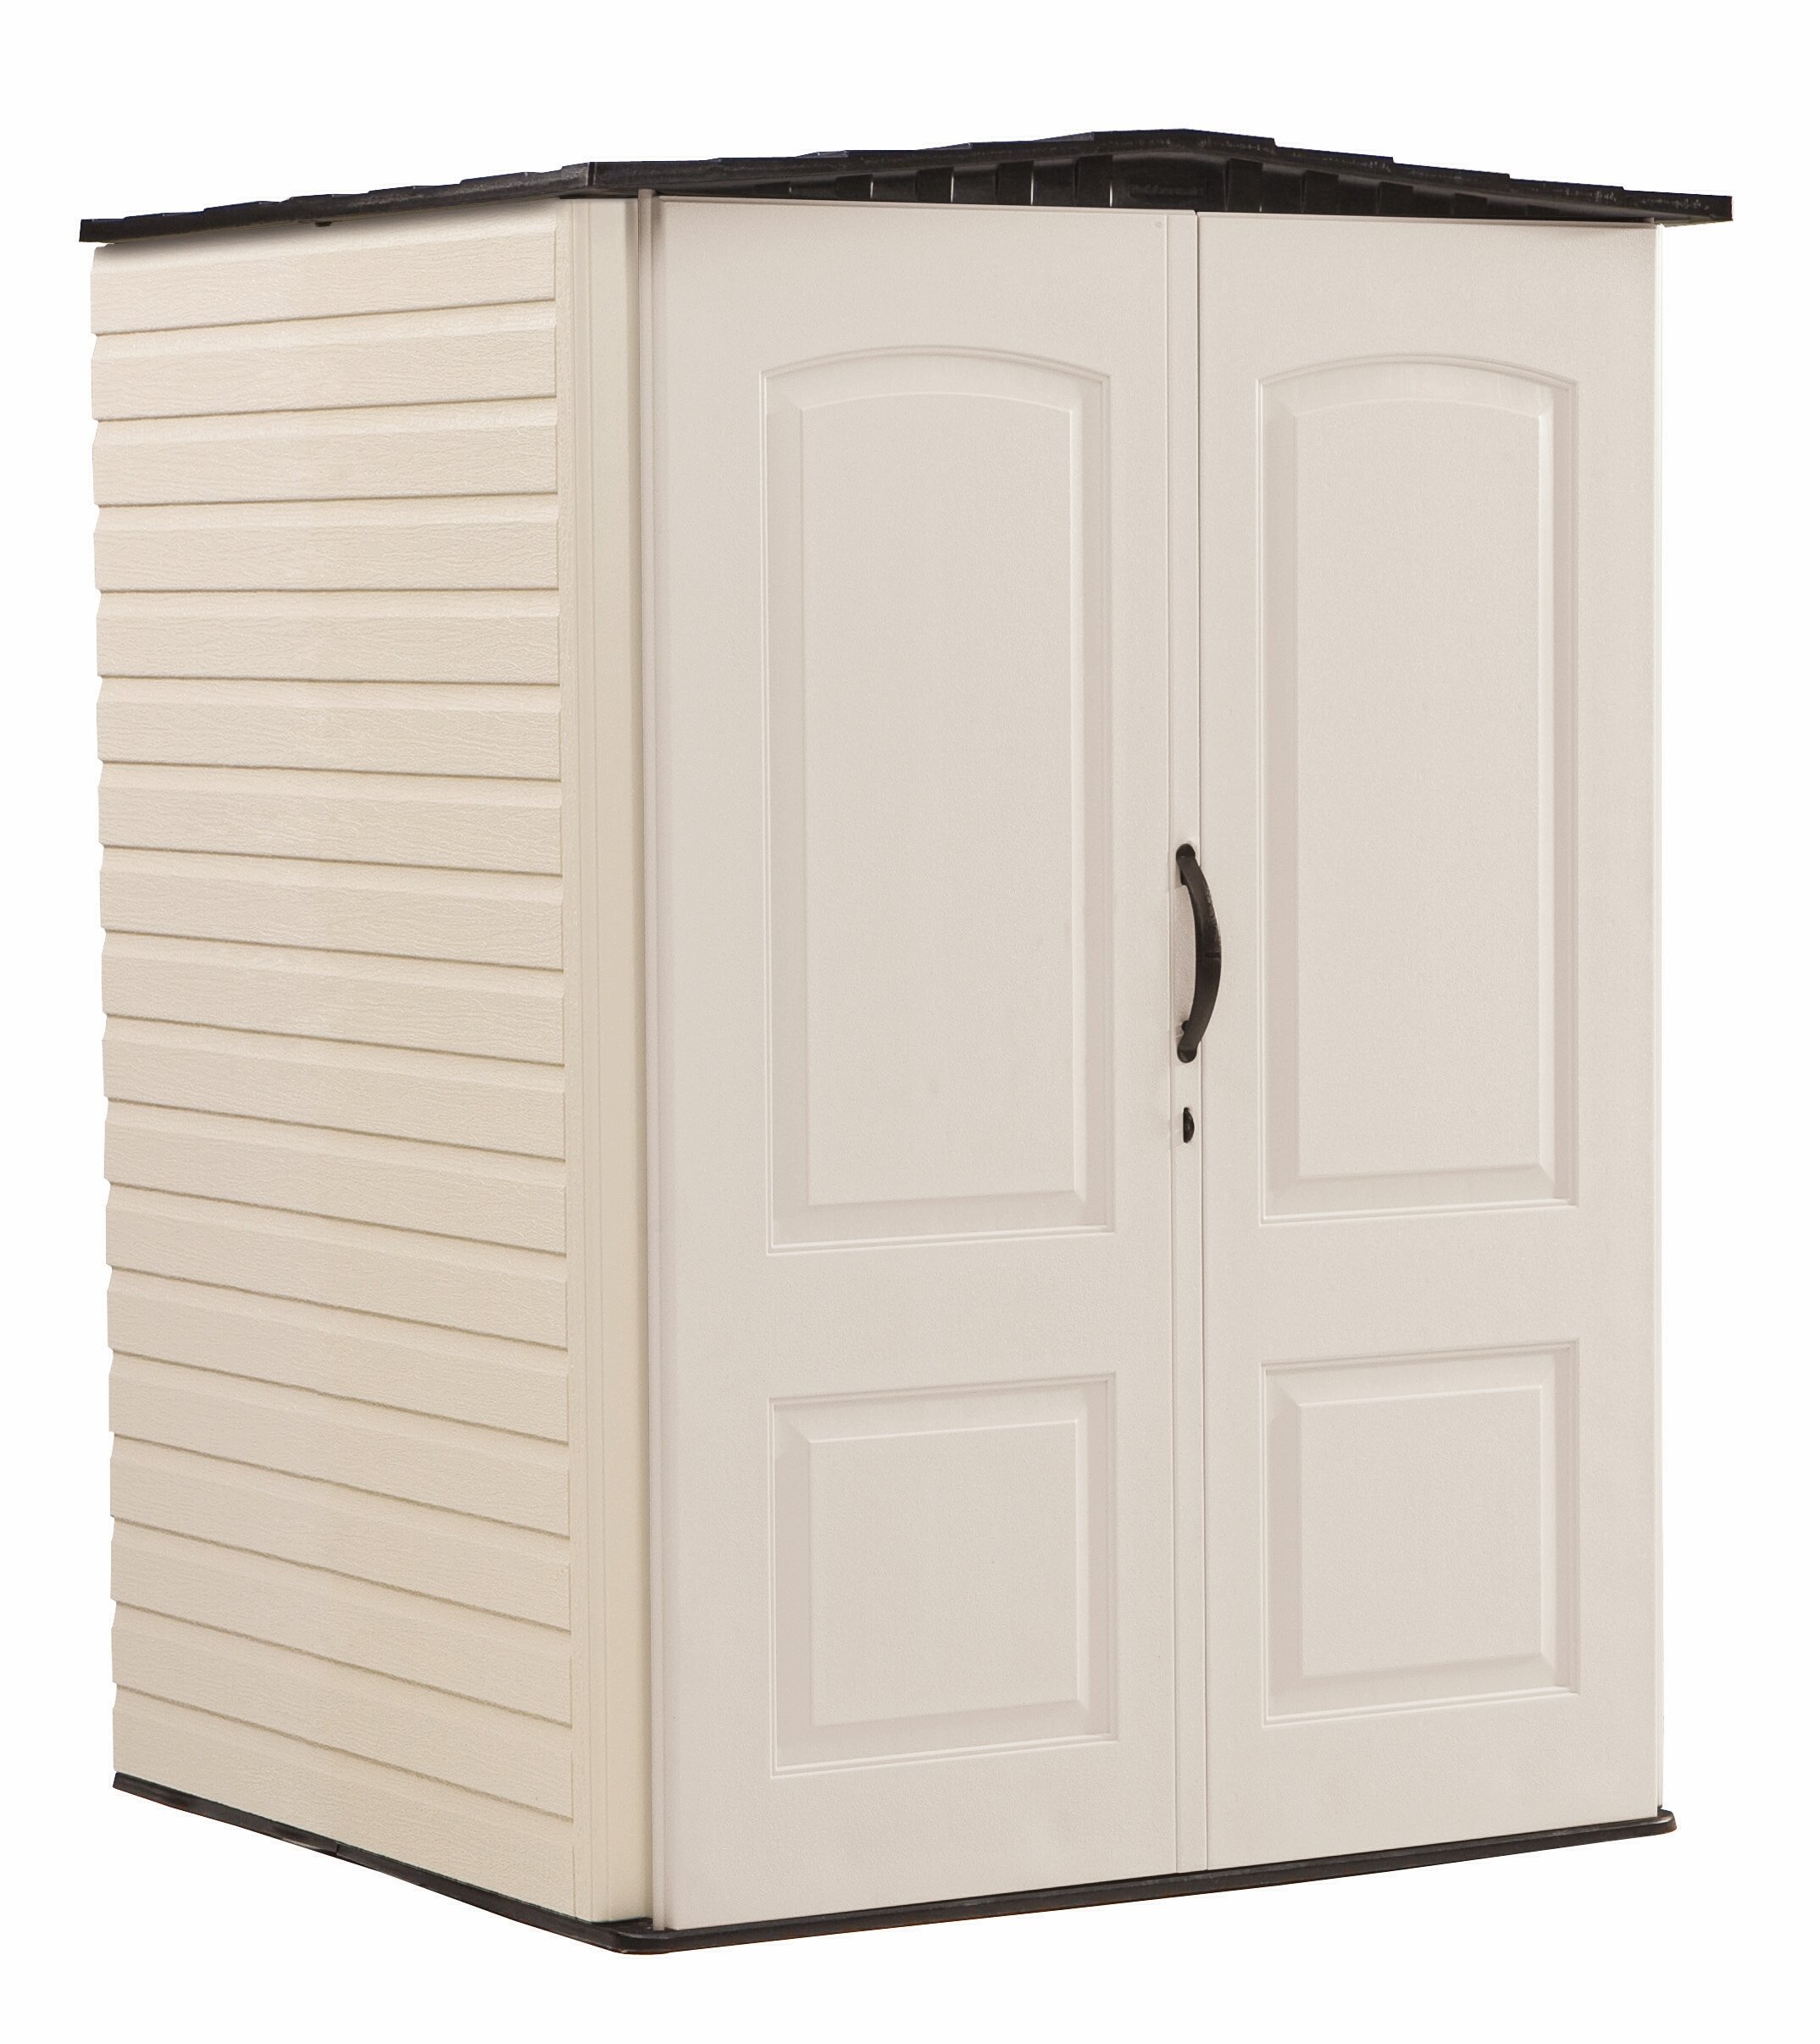 4'4" x 4'8" Rubbermaid Outdoor Vertical Storage Shed (Beige) $363 + Free Shipping